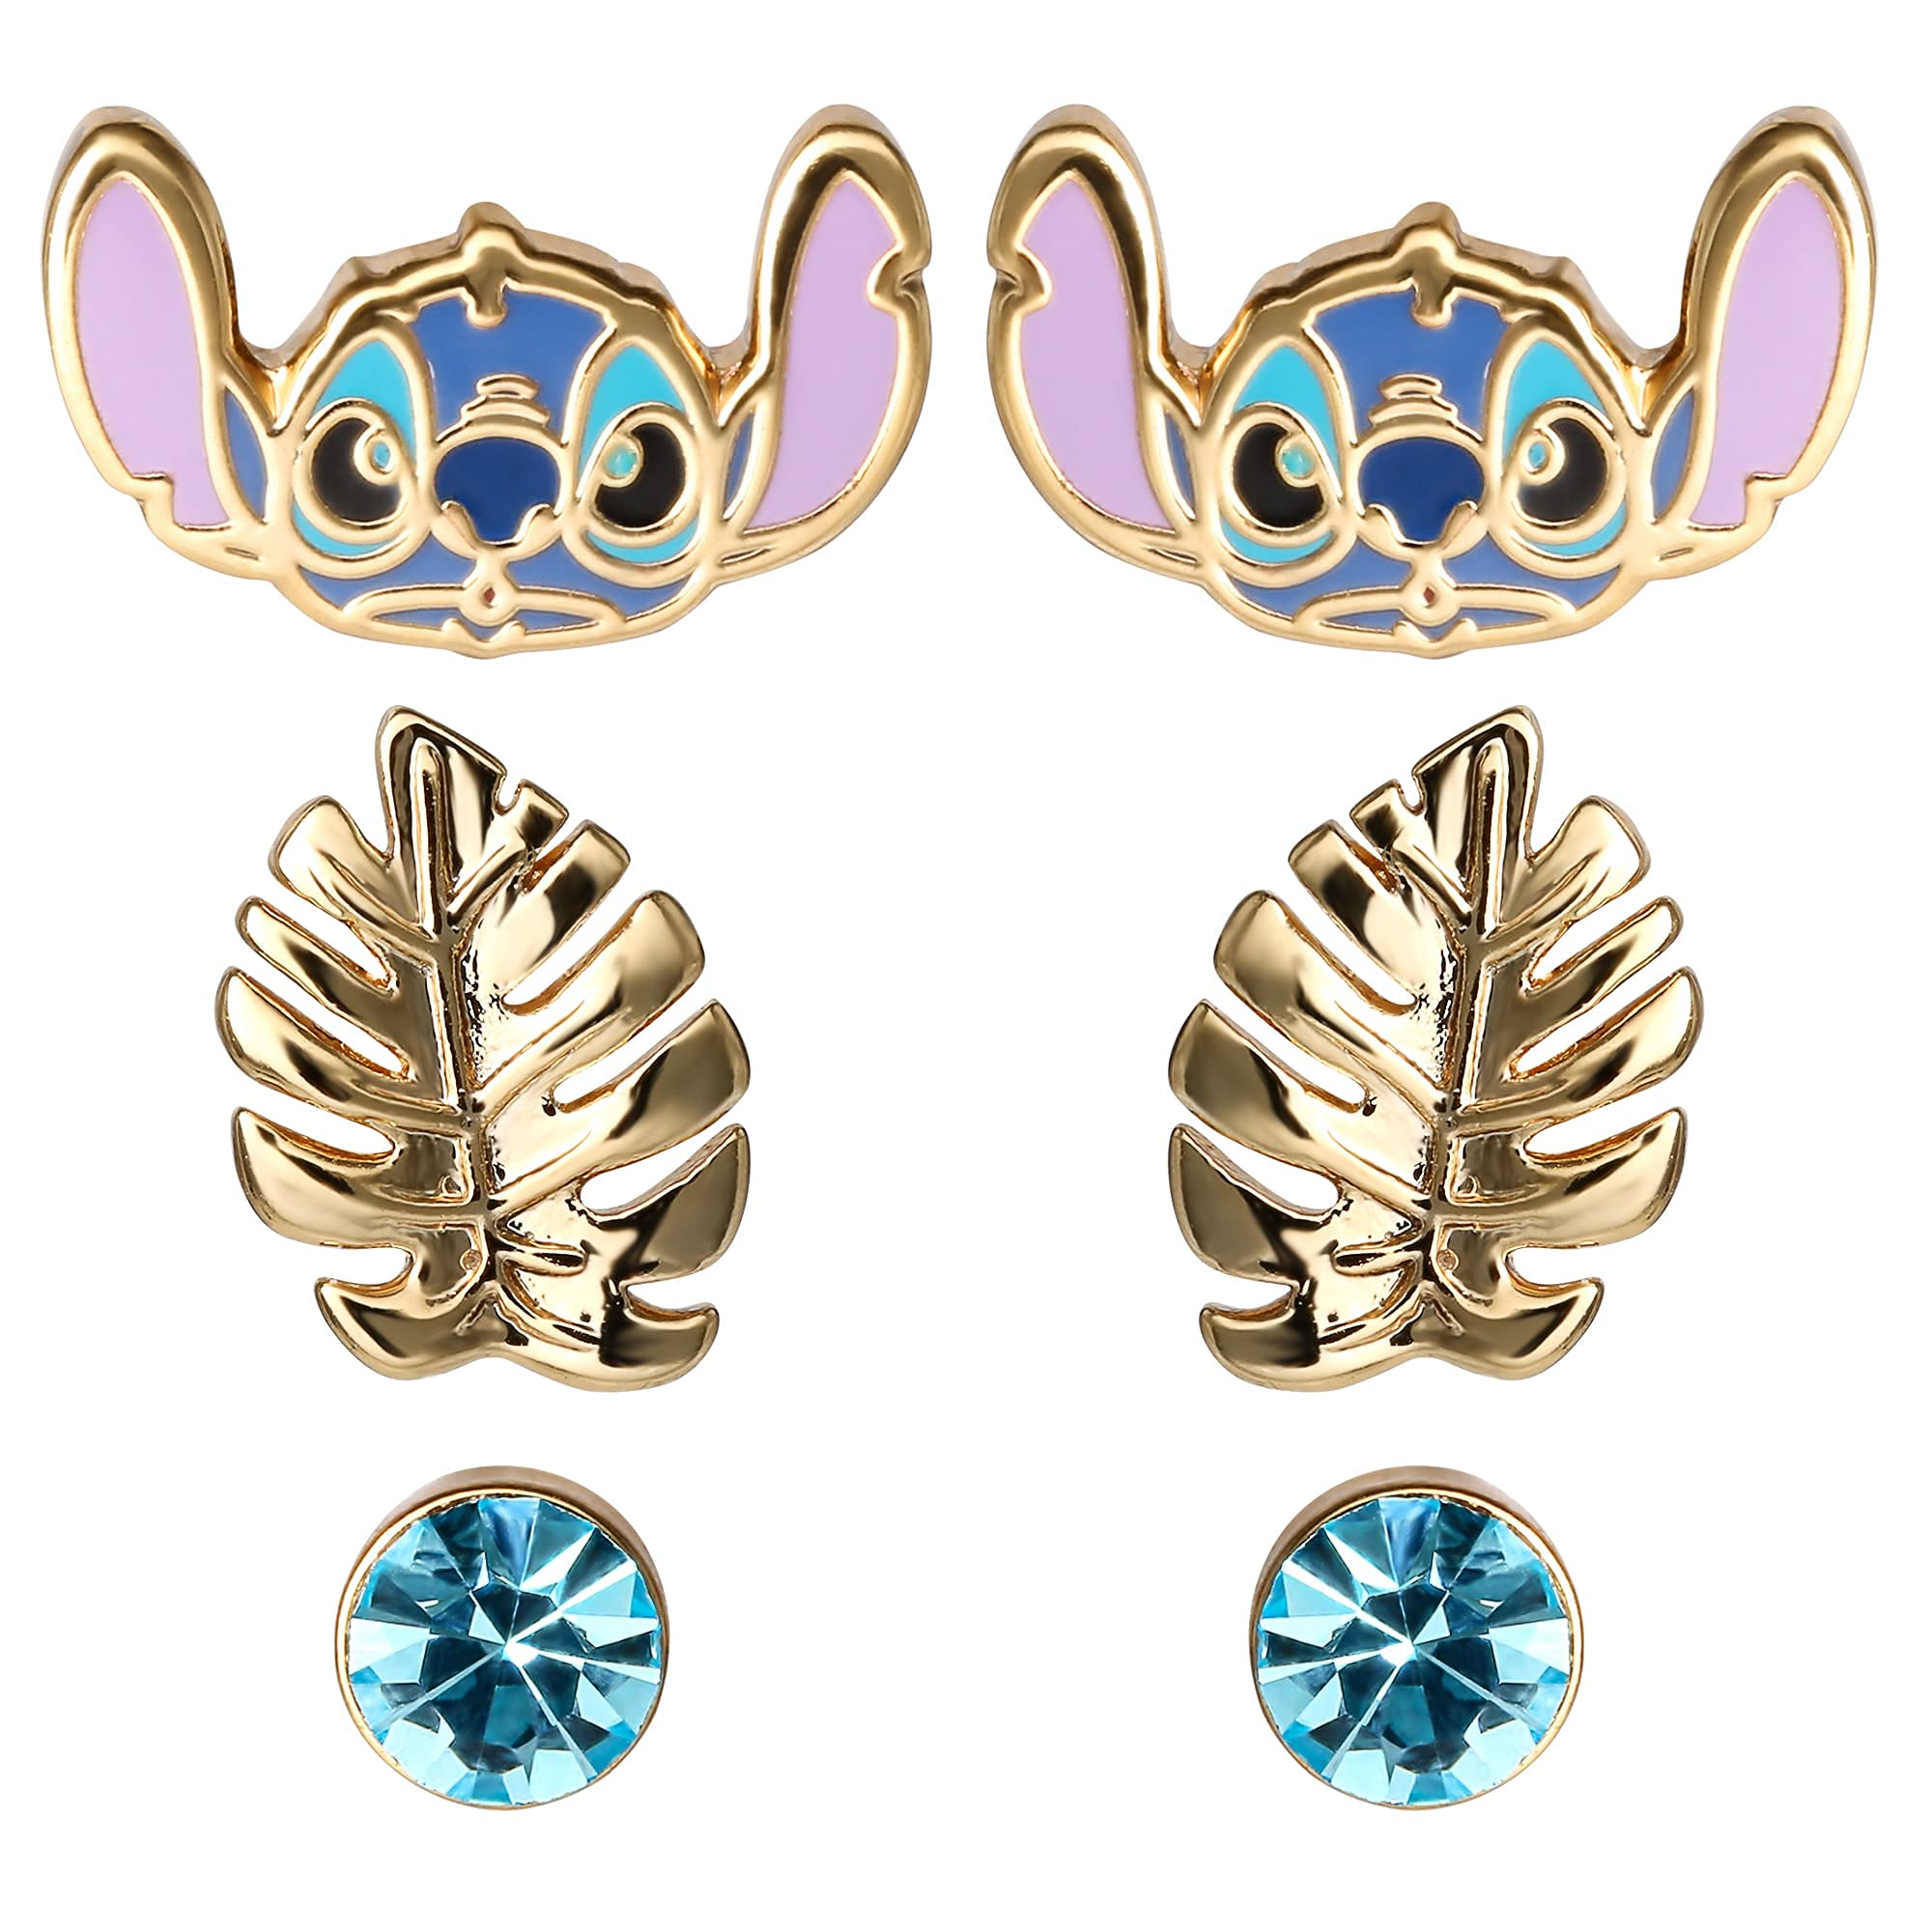 Disney Lilo and Stitch Jewelry for Girls Yellow Gold Plated Crystal Stud Earring Set, 3 Pairs, Officially Licensed